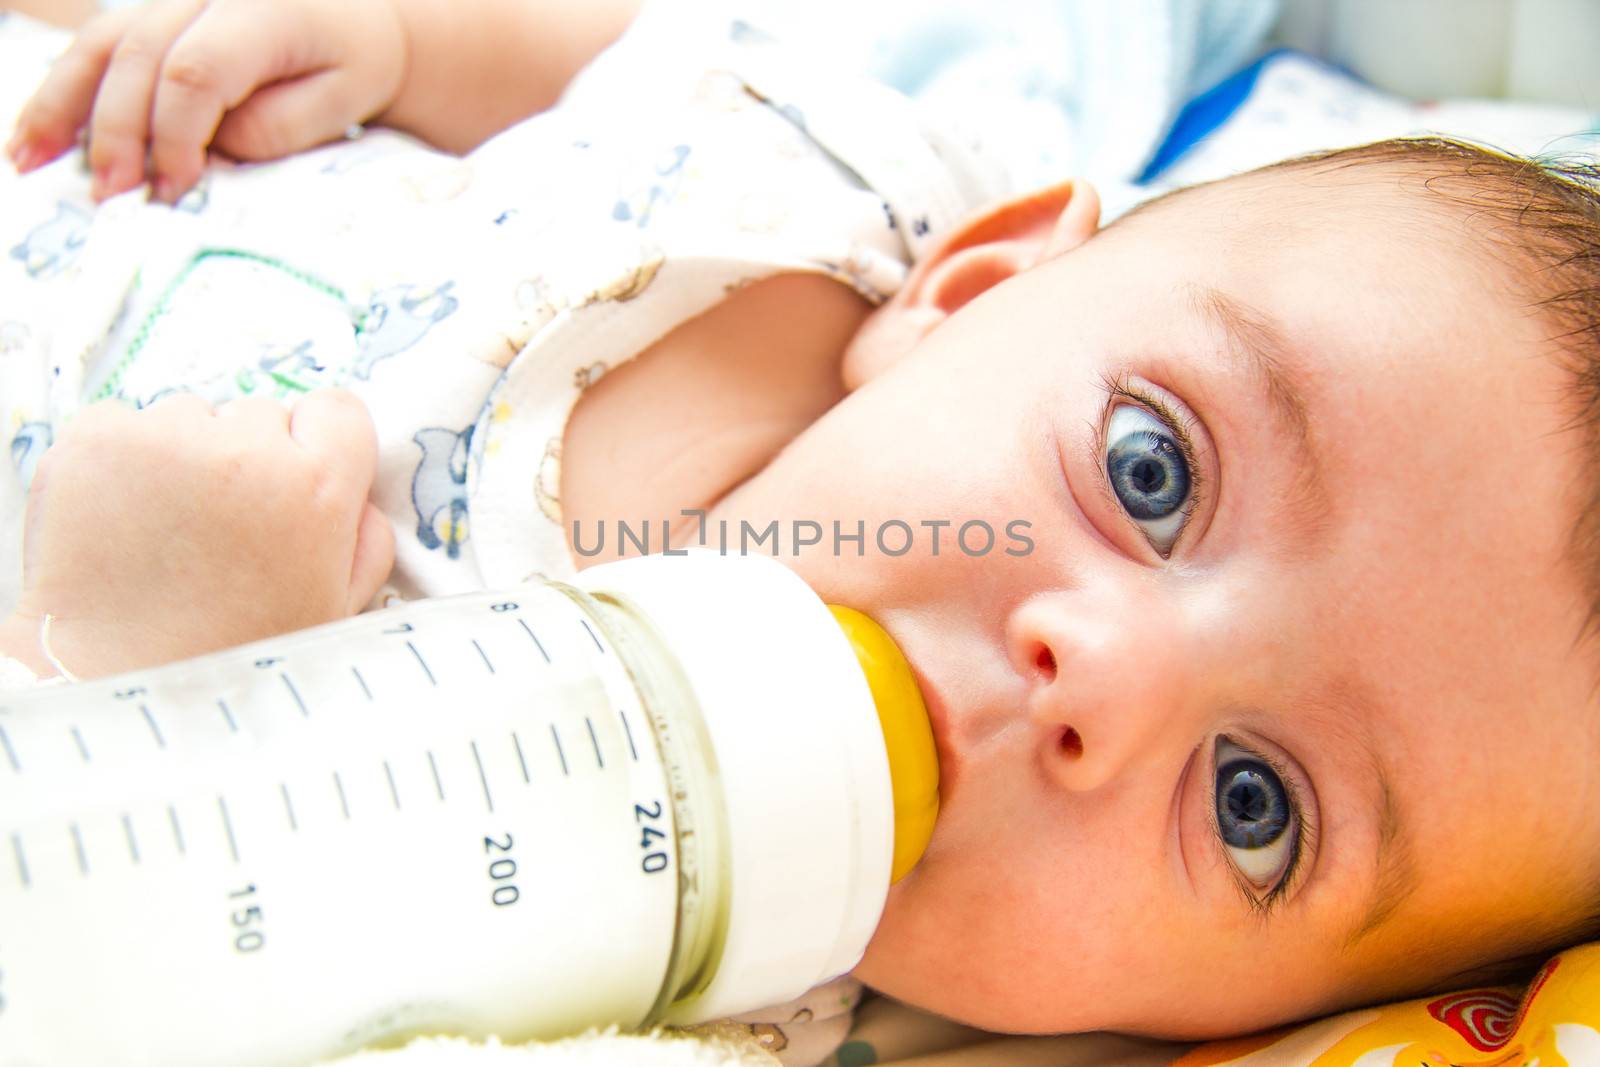 Baby and milk bottle by dynamicfoto